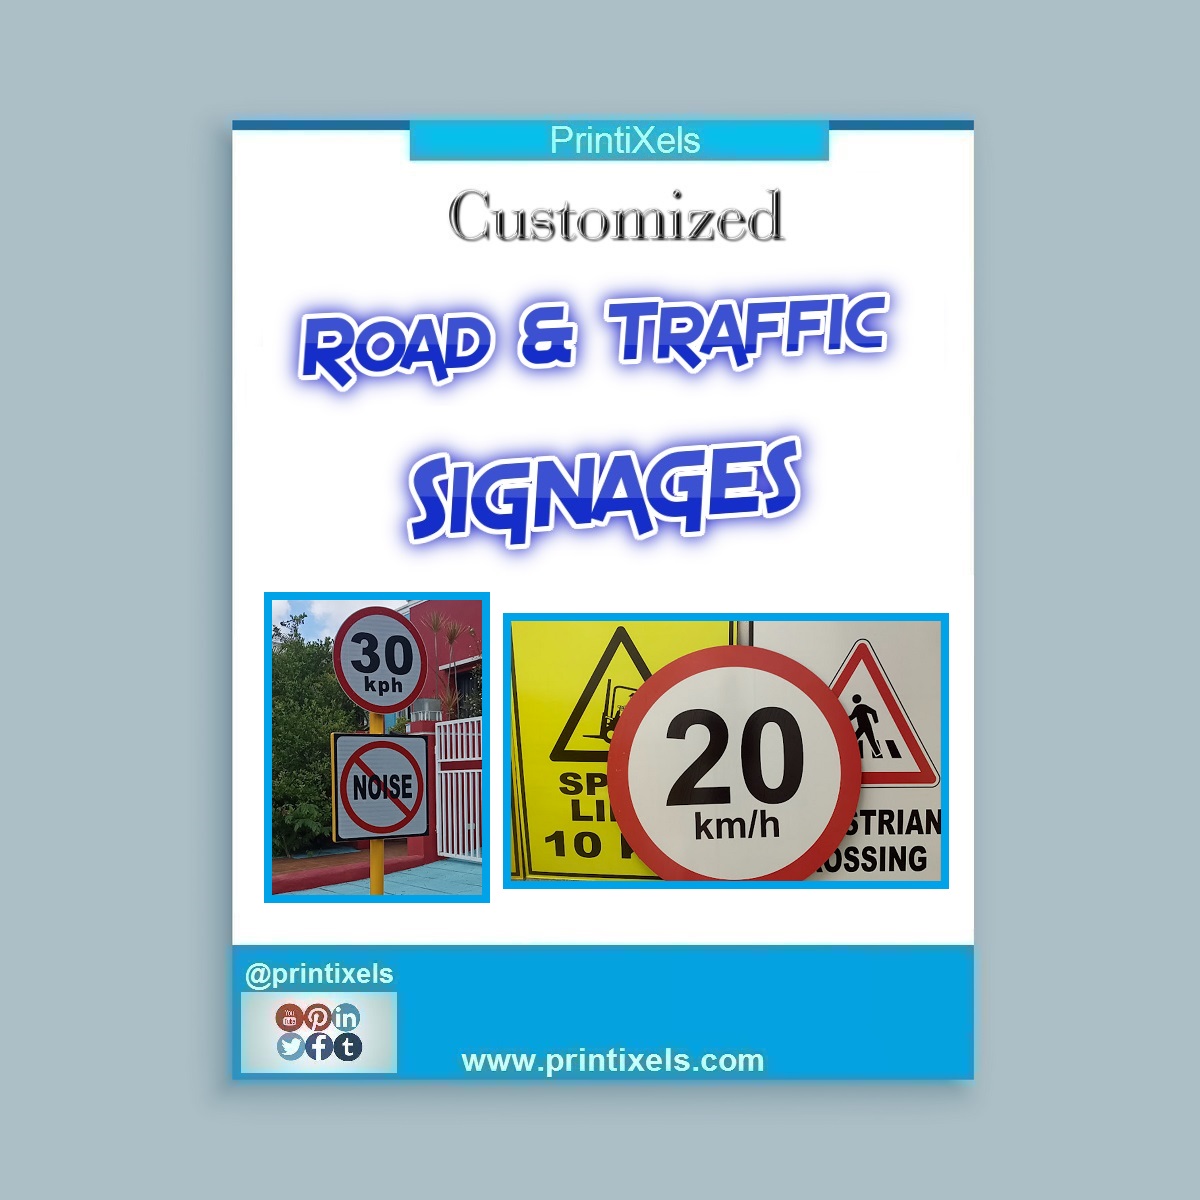 Customized Road and Traffic Signages Philippines